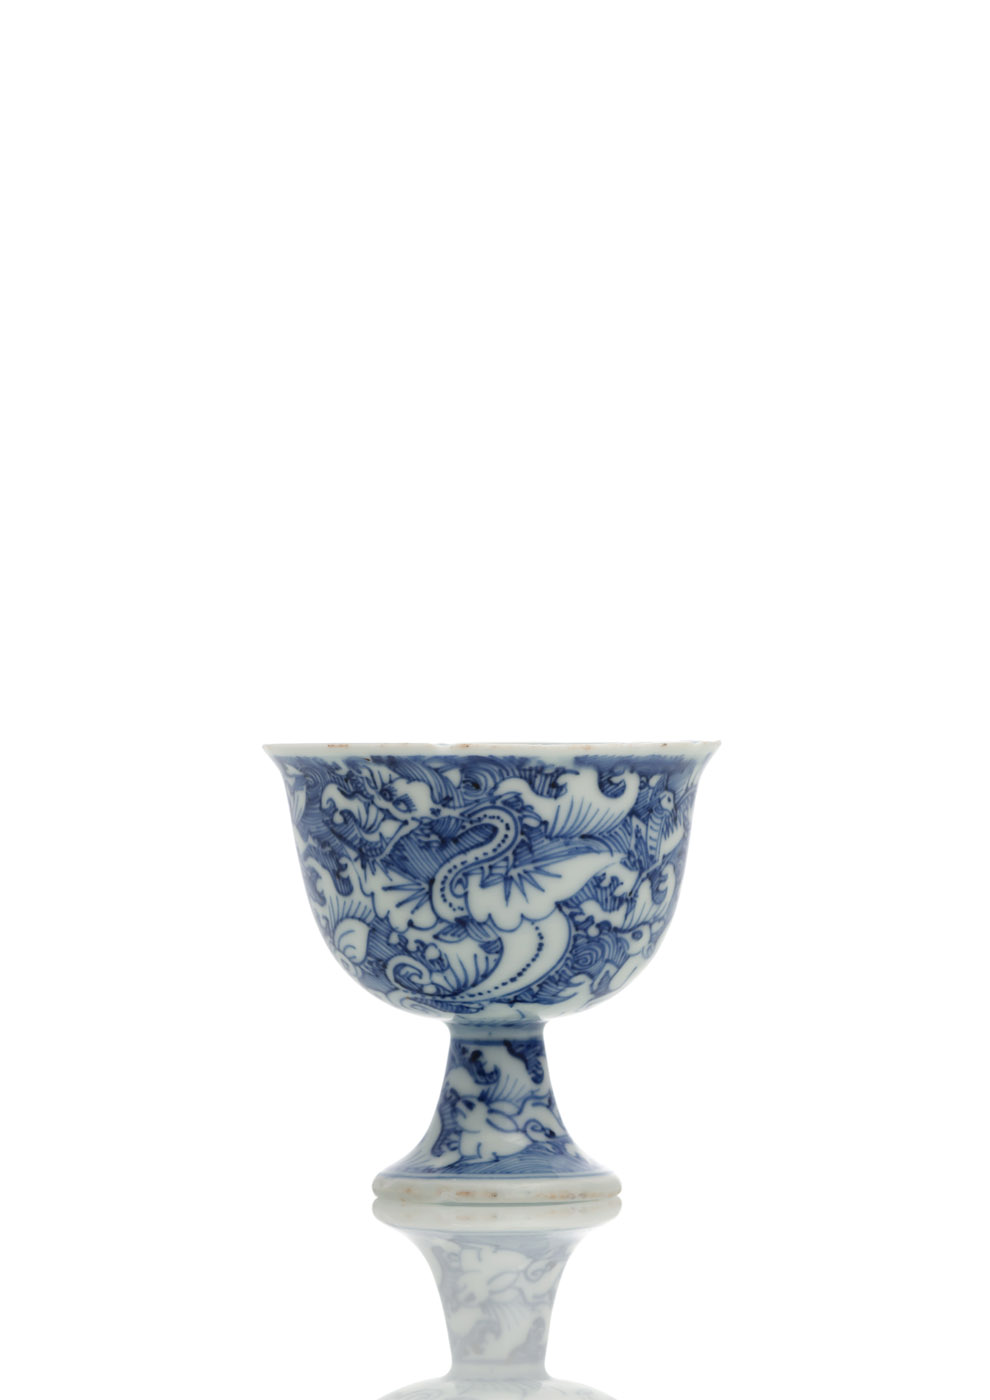 A RARE BLUE AND WHITE STEM CUP